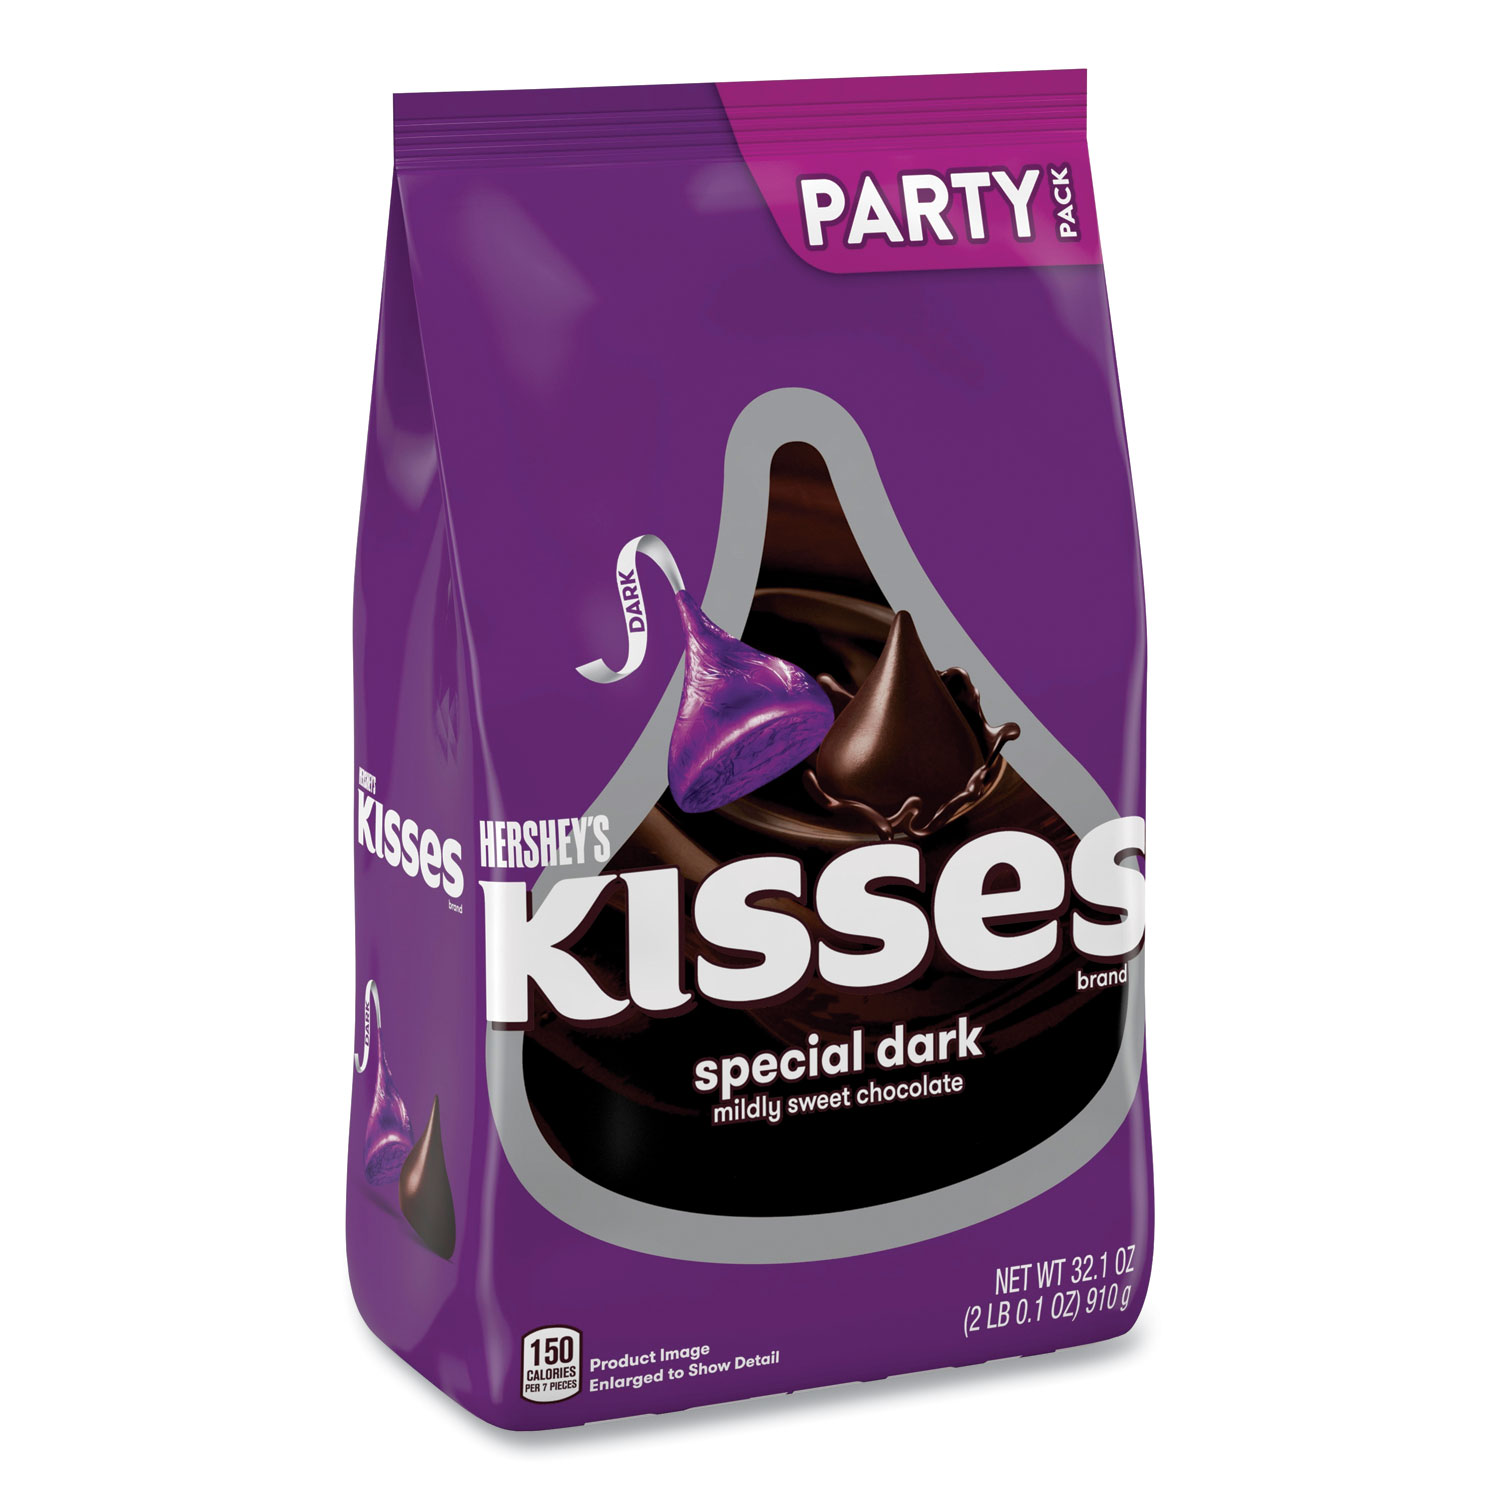  Hershey's 13462 KISSES Special Dark Chocolate Candy, Party Pack, 32.1 oz Bag, Free Delivery in 1-4 Business Days (GRR24600419) 